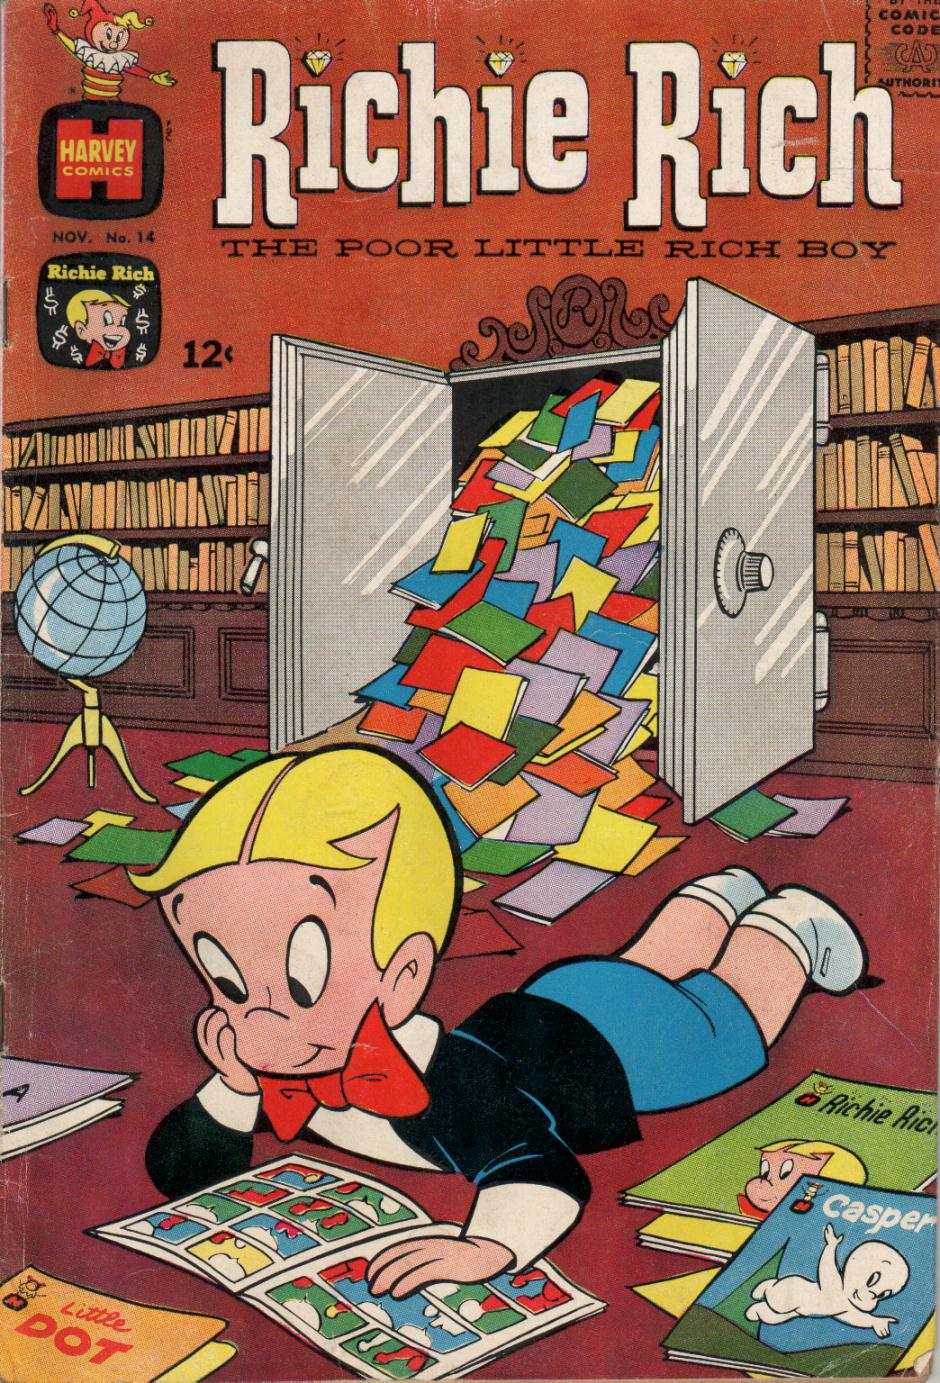 Read Comics Online Free Richie Rich Comic Book Issue 014 Page 1